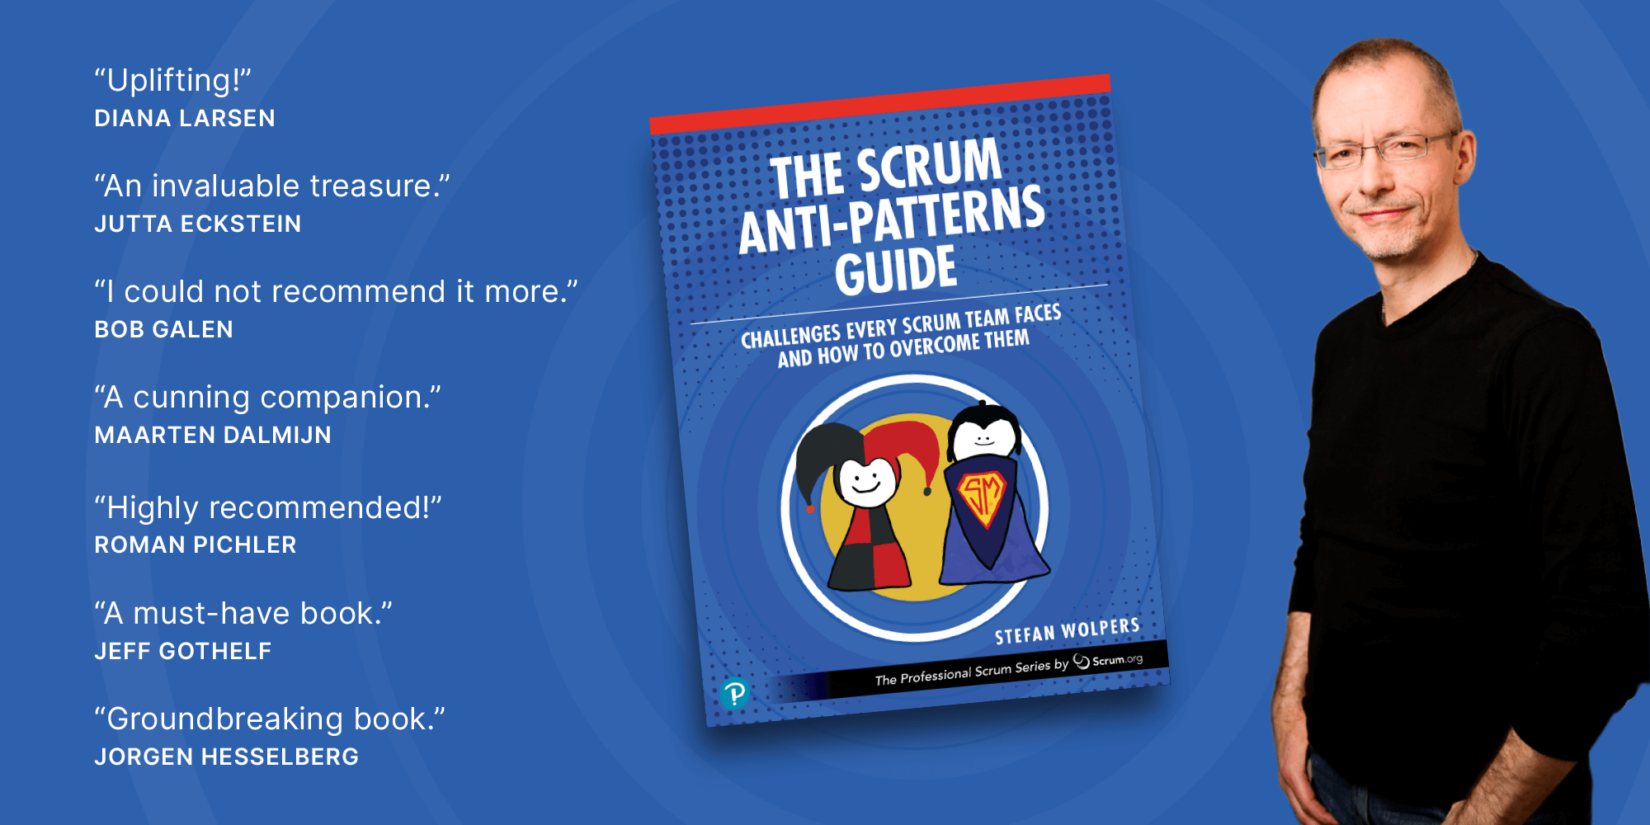 Learn About the ‘Scrum Anti-Patterns Guide’ w/ a Free Email Course by the author Stefan Wolpers — Age-of-Product.com